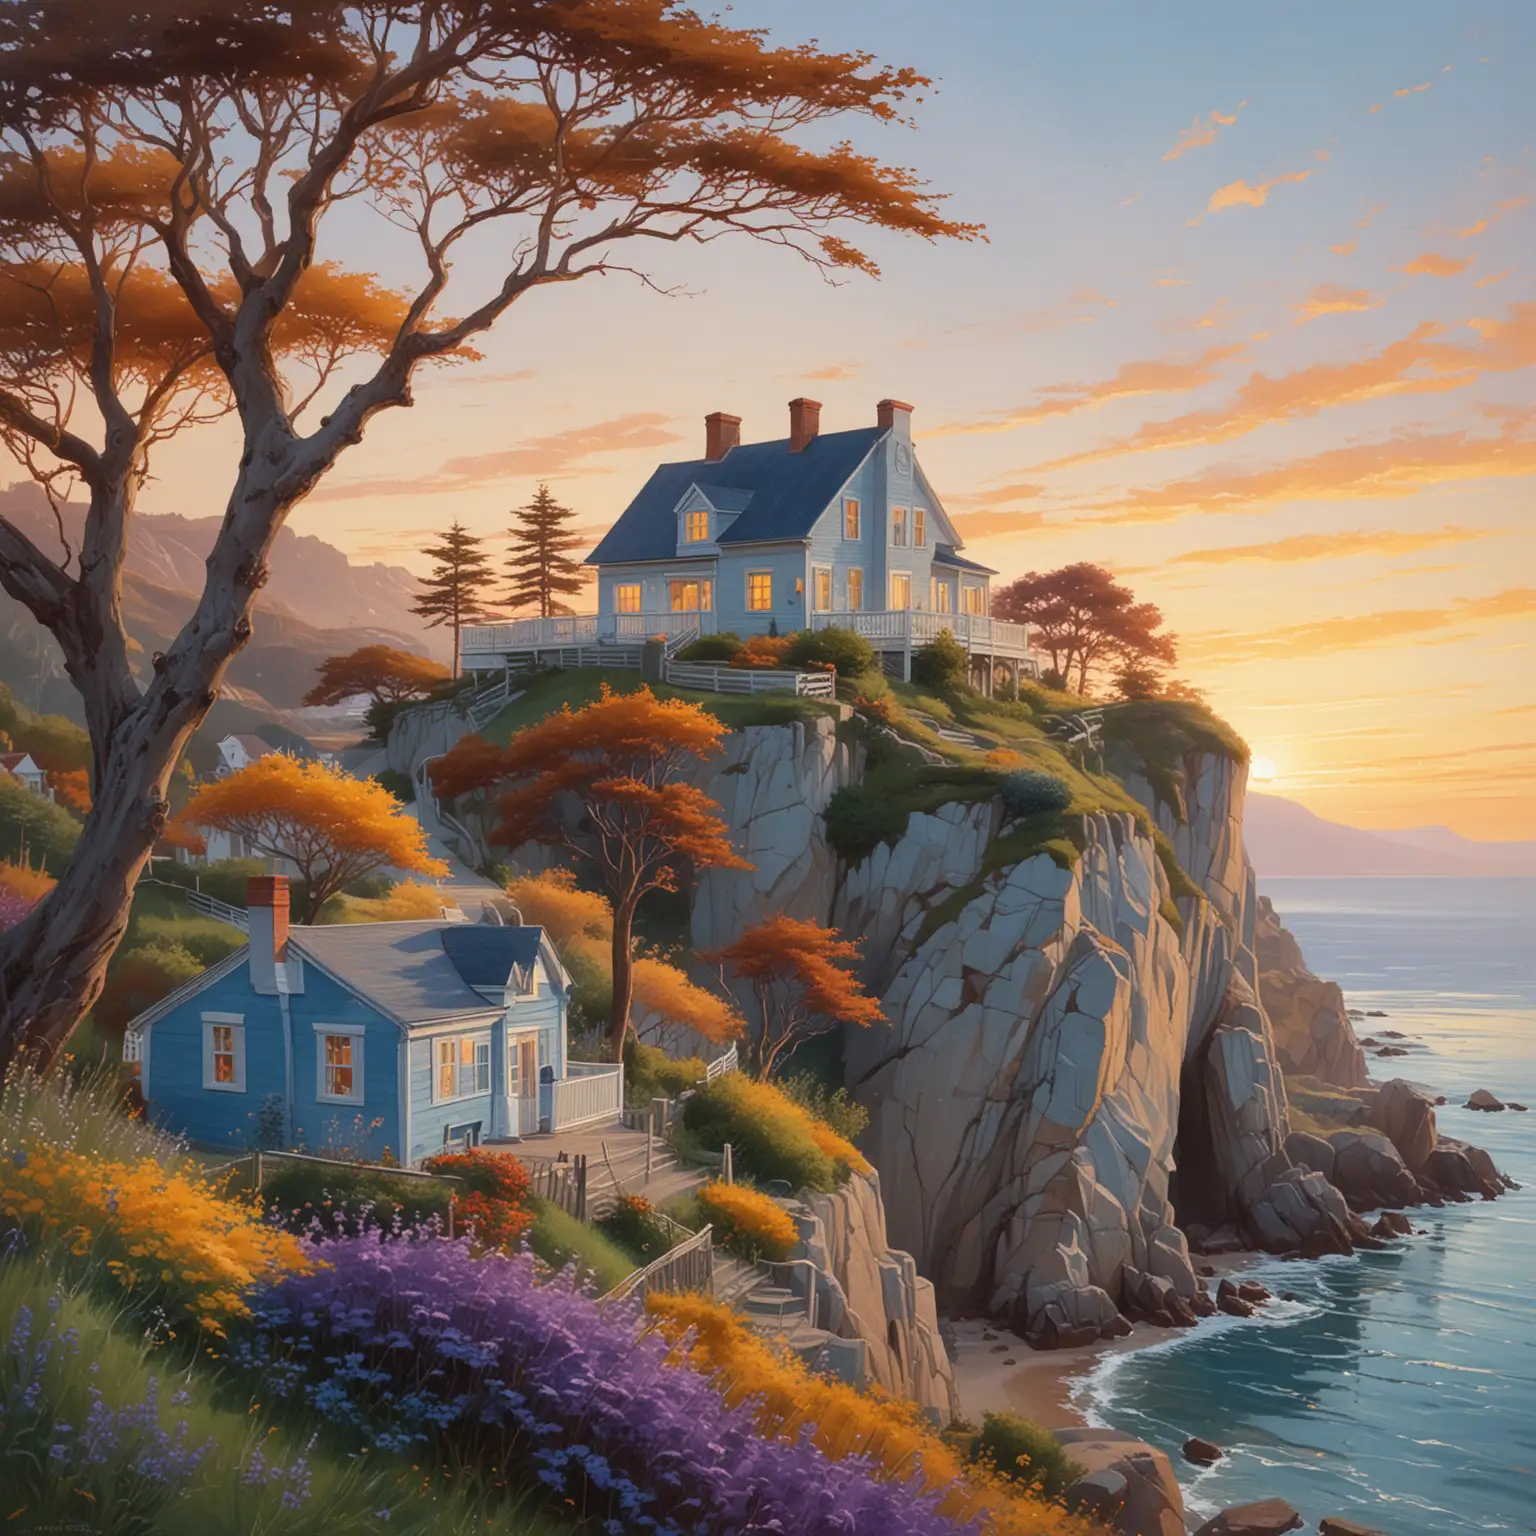 Tranquil Coastal Sunset Scene with Cliffside House and Golden Reflections